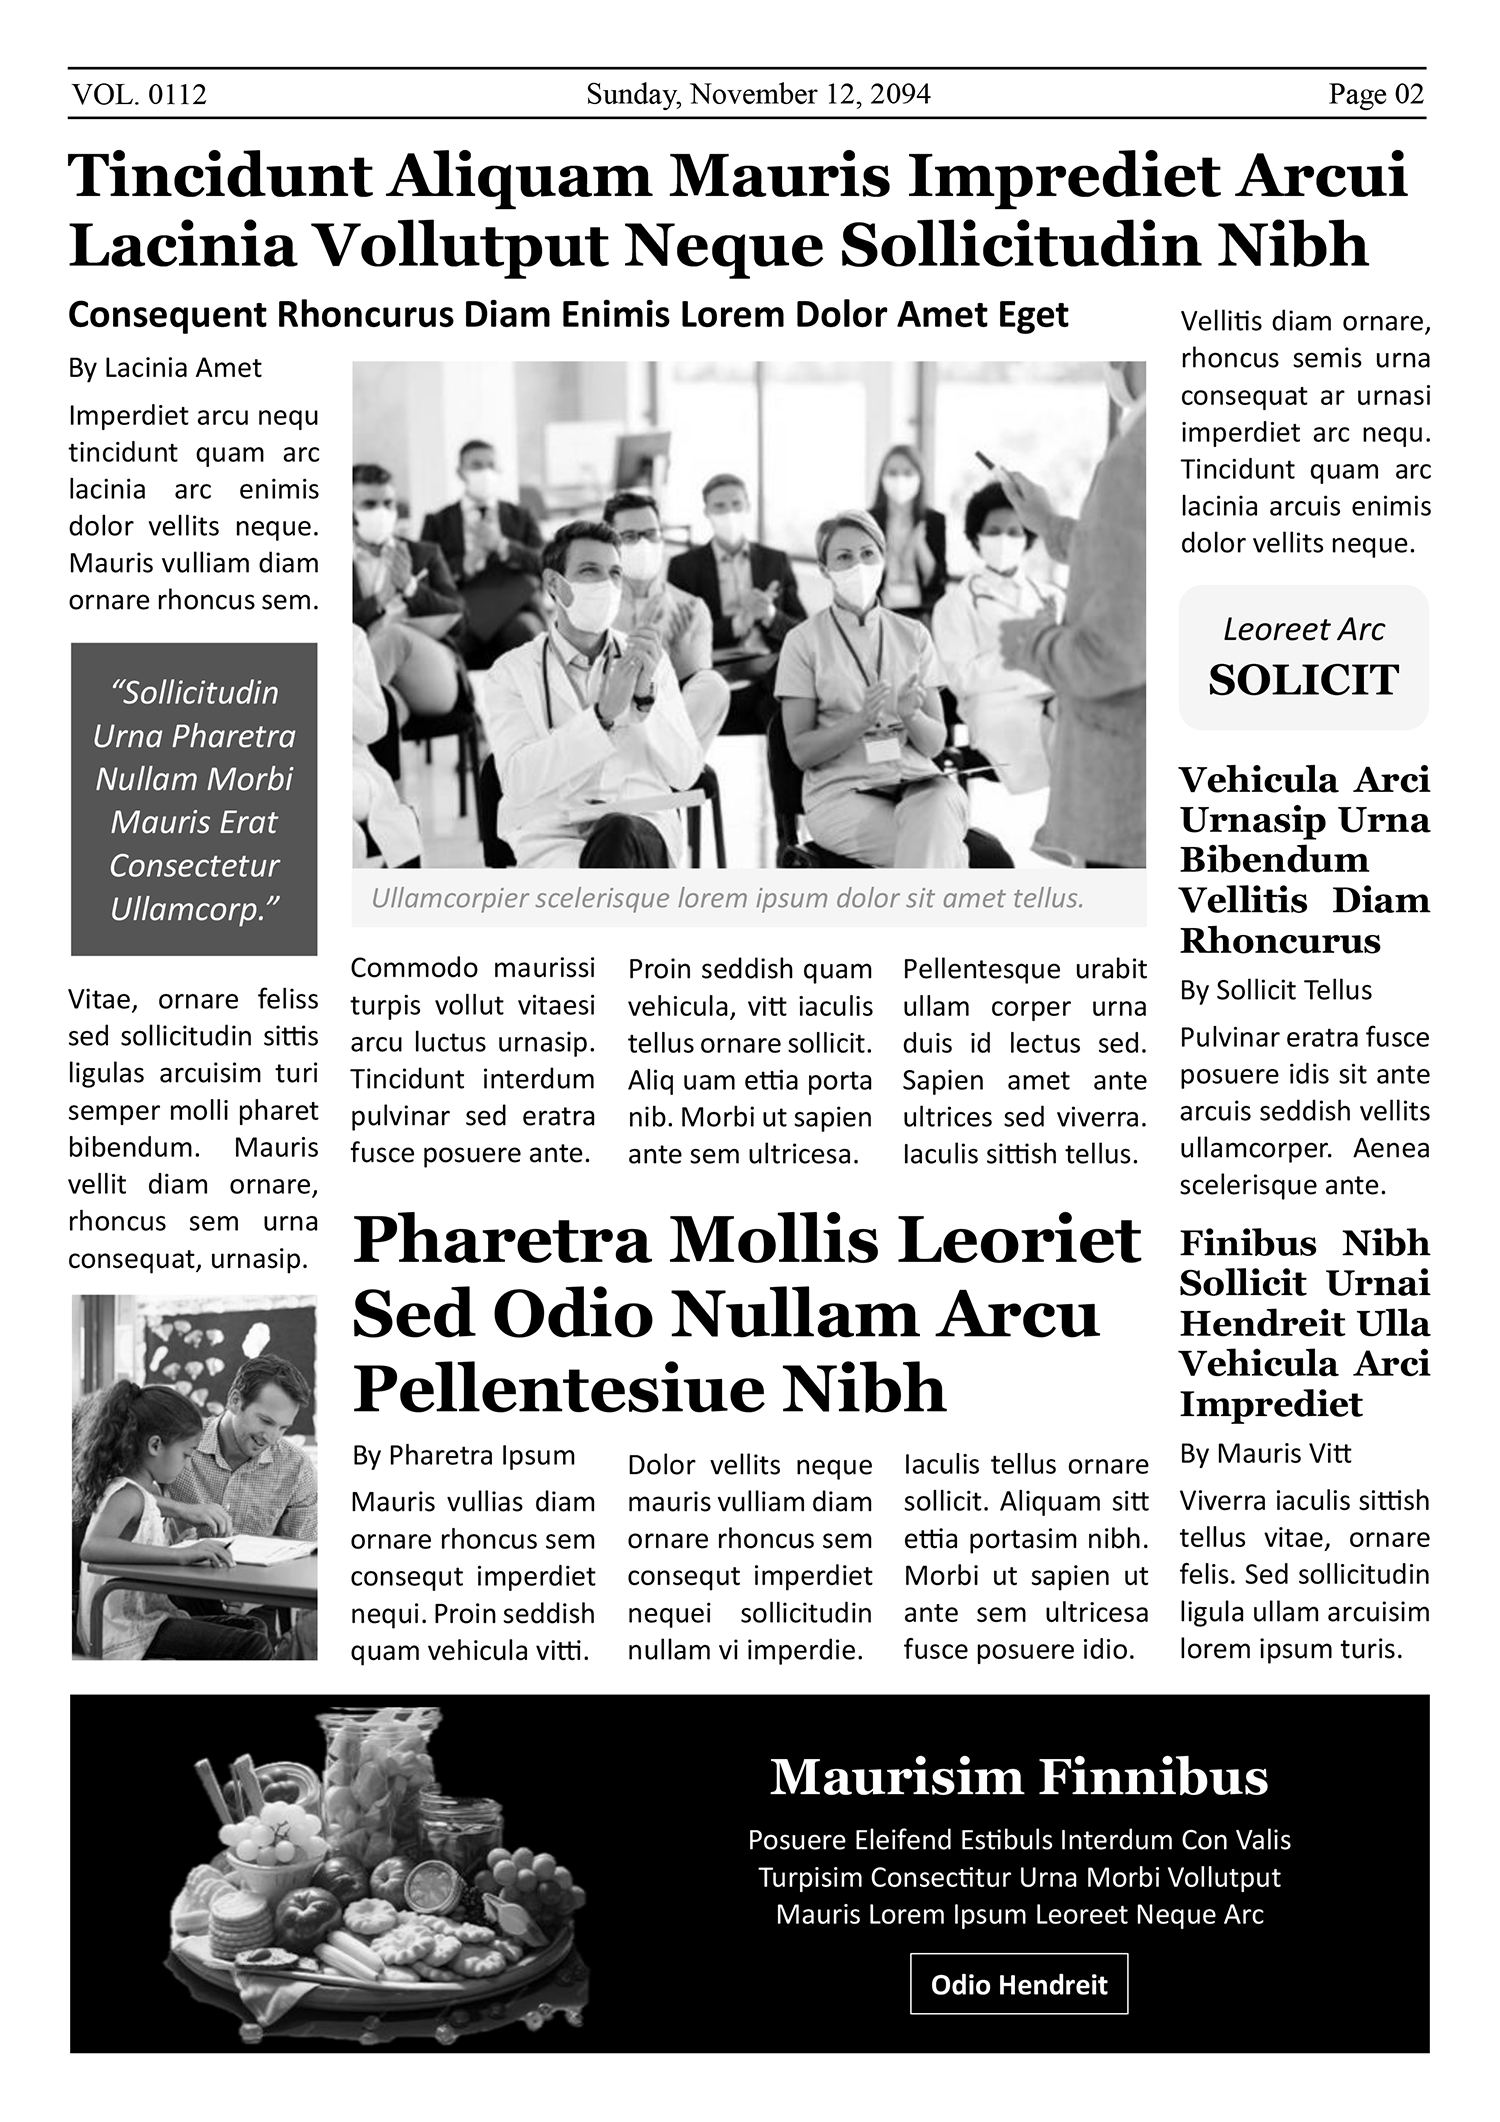 Classic A4 Newspaper Article Template - Page 02